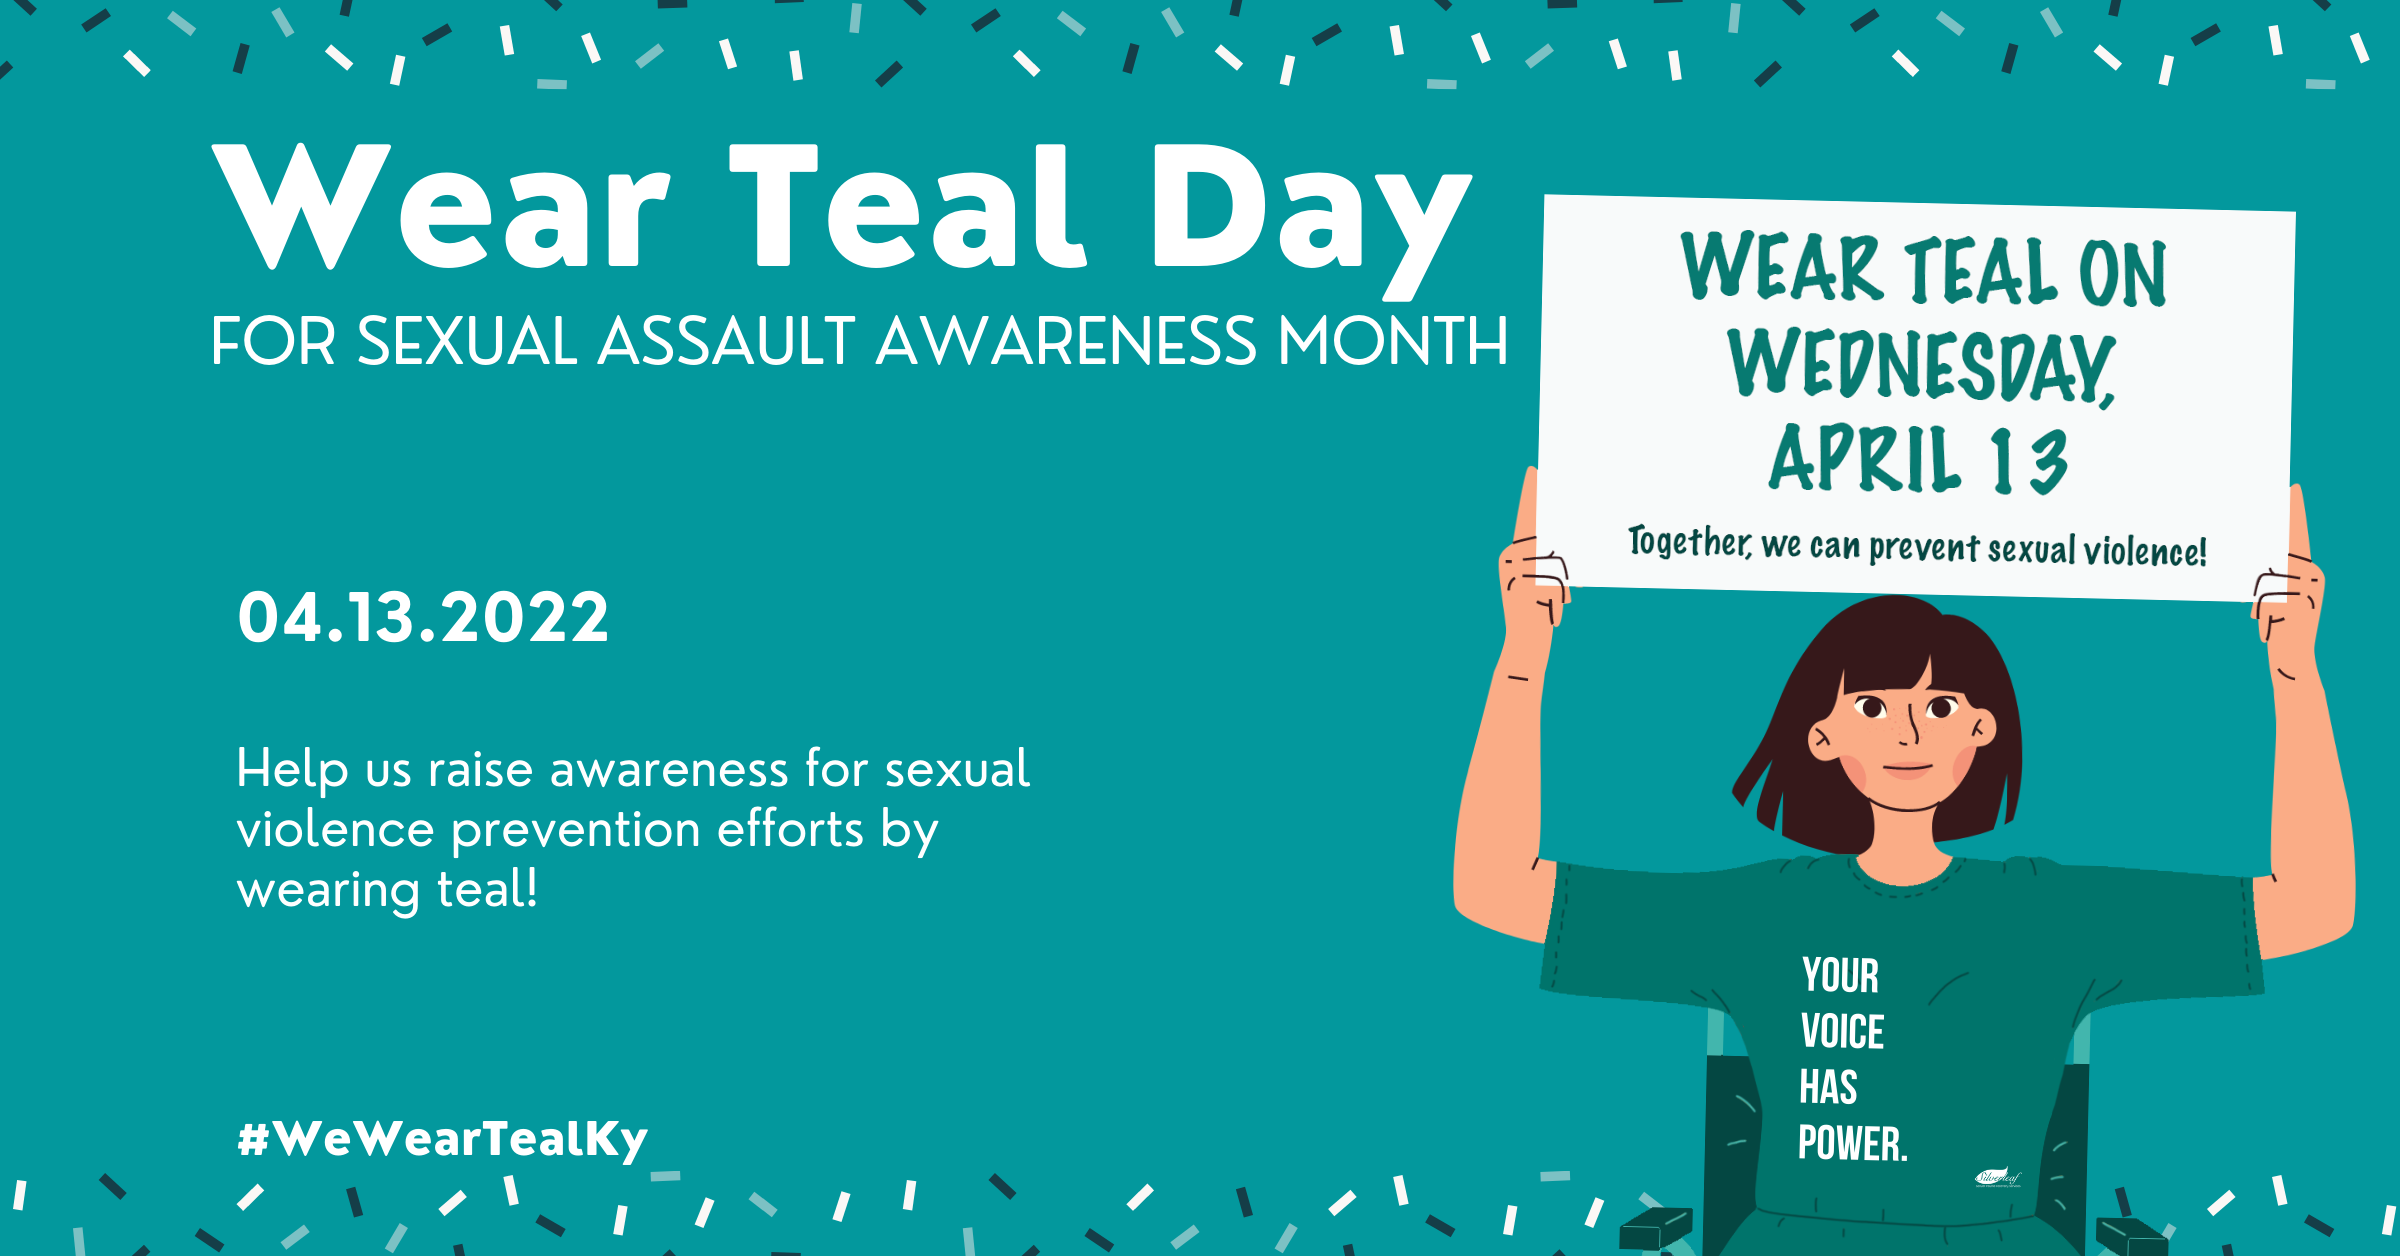 April 13, Wear Teal Day